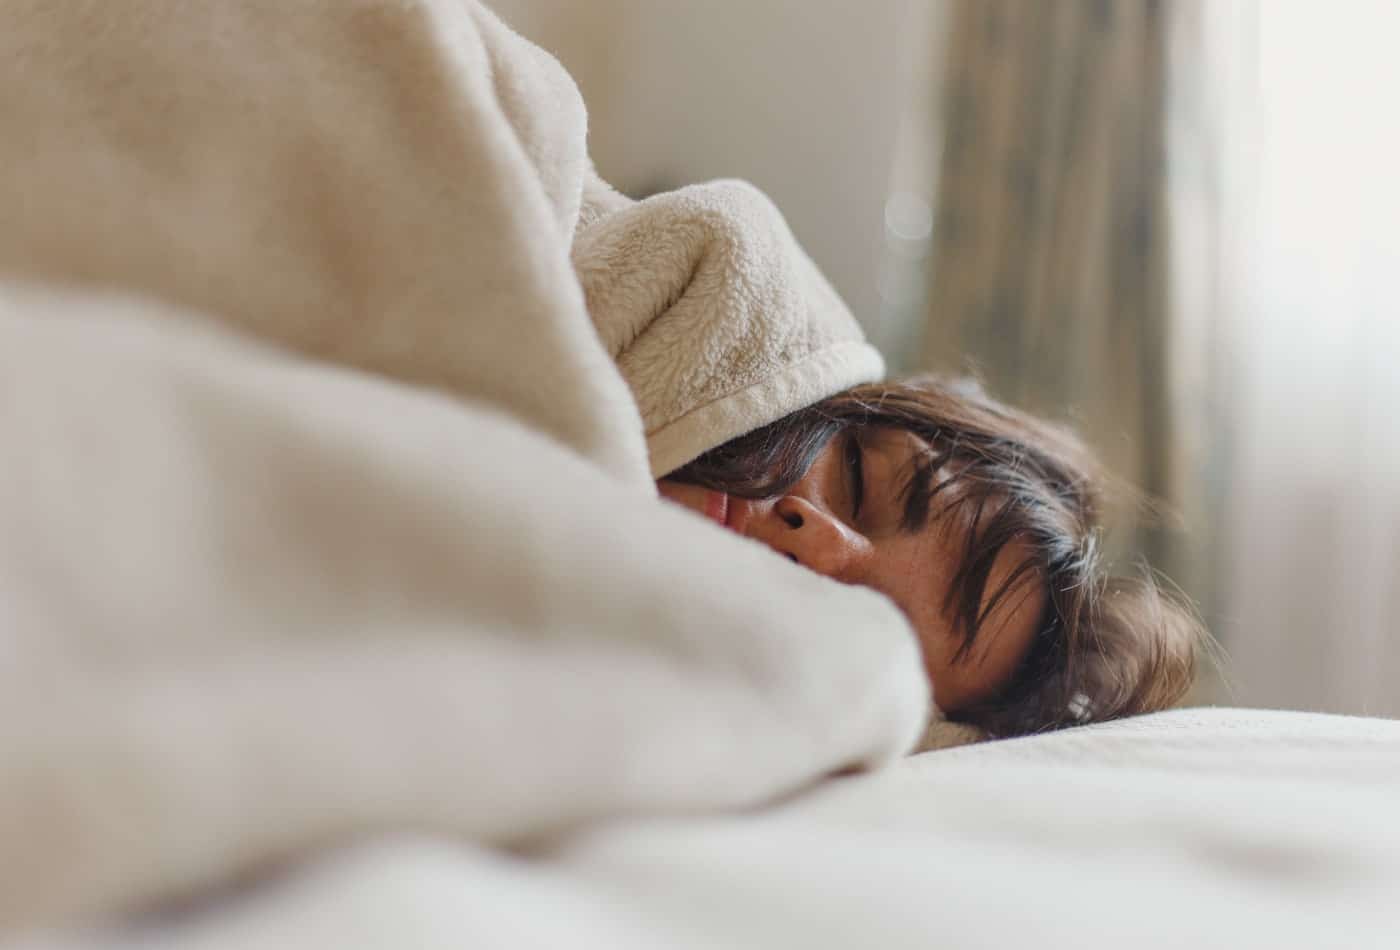 can sleep really boost your immune system?